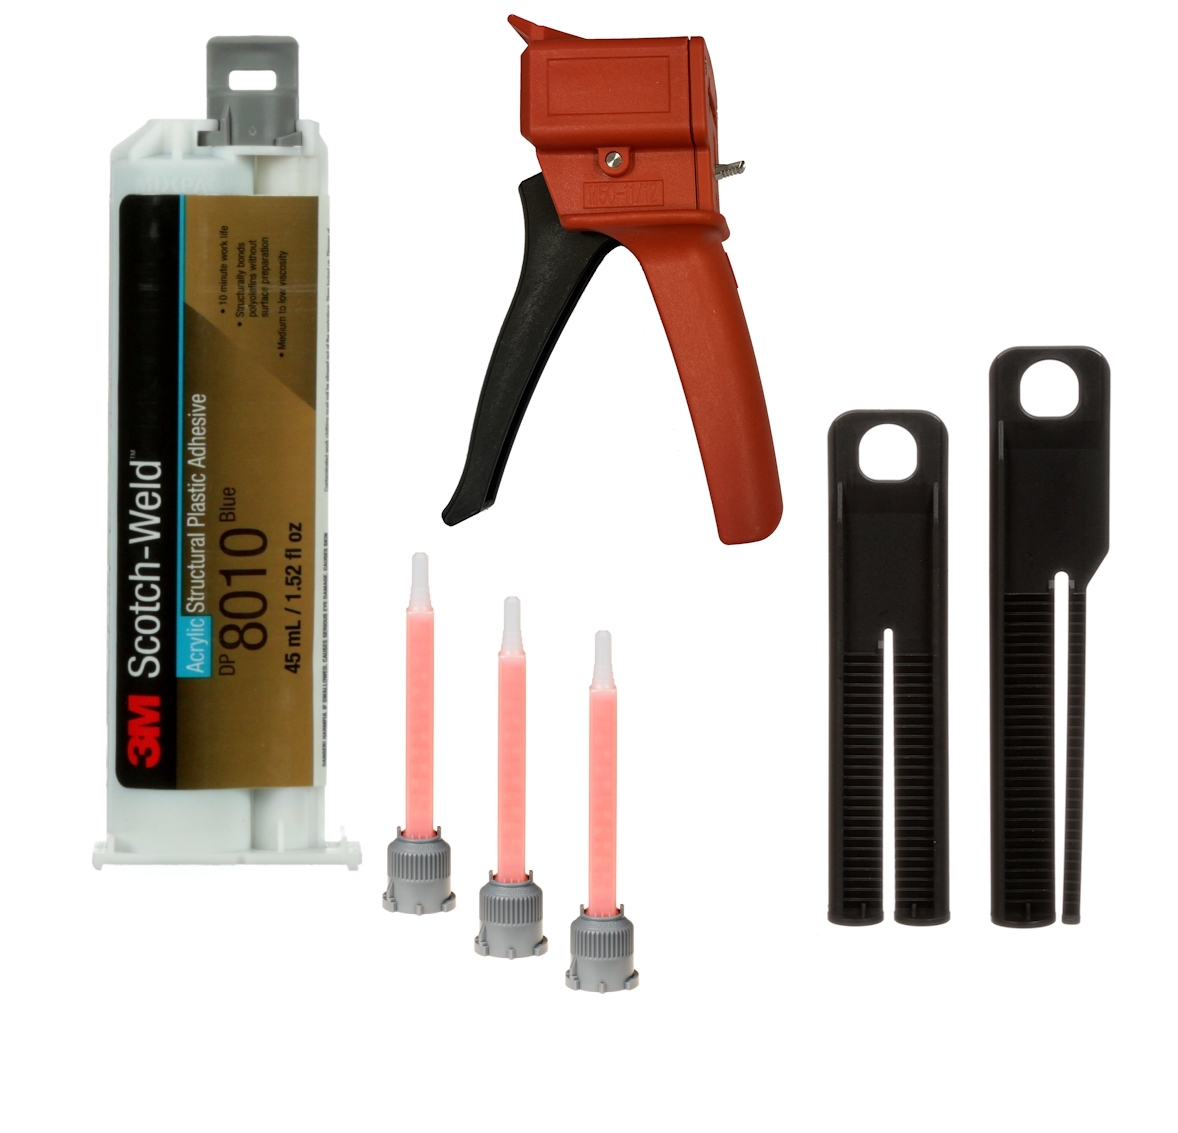 Starter set: 1x 3M Scotch-Weld 2-component construction adhesive EPX System DP8010, blue-green, 45 ml 1x S-K-S hand tool for EPX 38 to 50 ml cartridges incl. feed piston 2:1